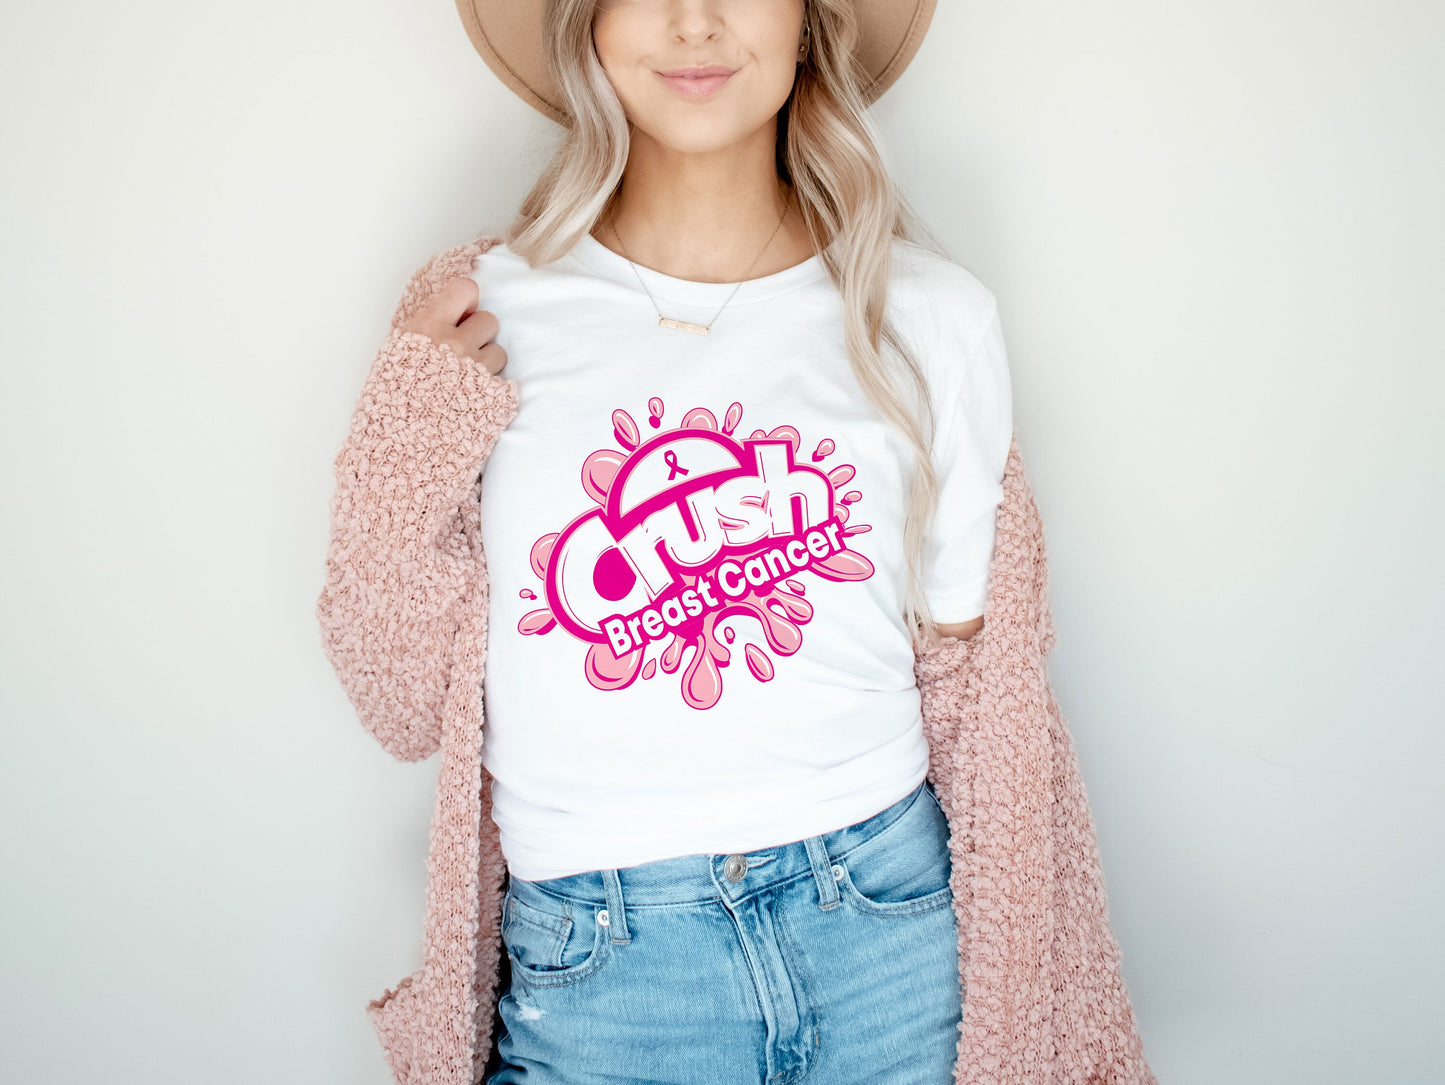 Crush Cancer Soda Pun Pink Ribbon Fight Breast Cancer Support Tee Style Ultra Soft Graphic Tee Unisex Soft Tee T-shirt for Women or Men